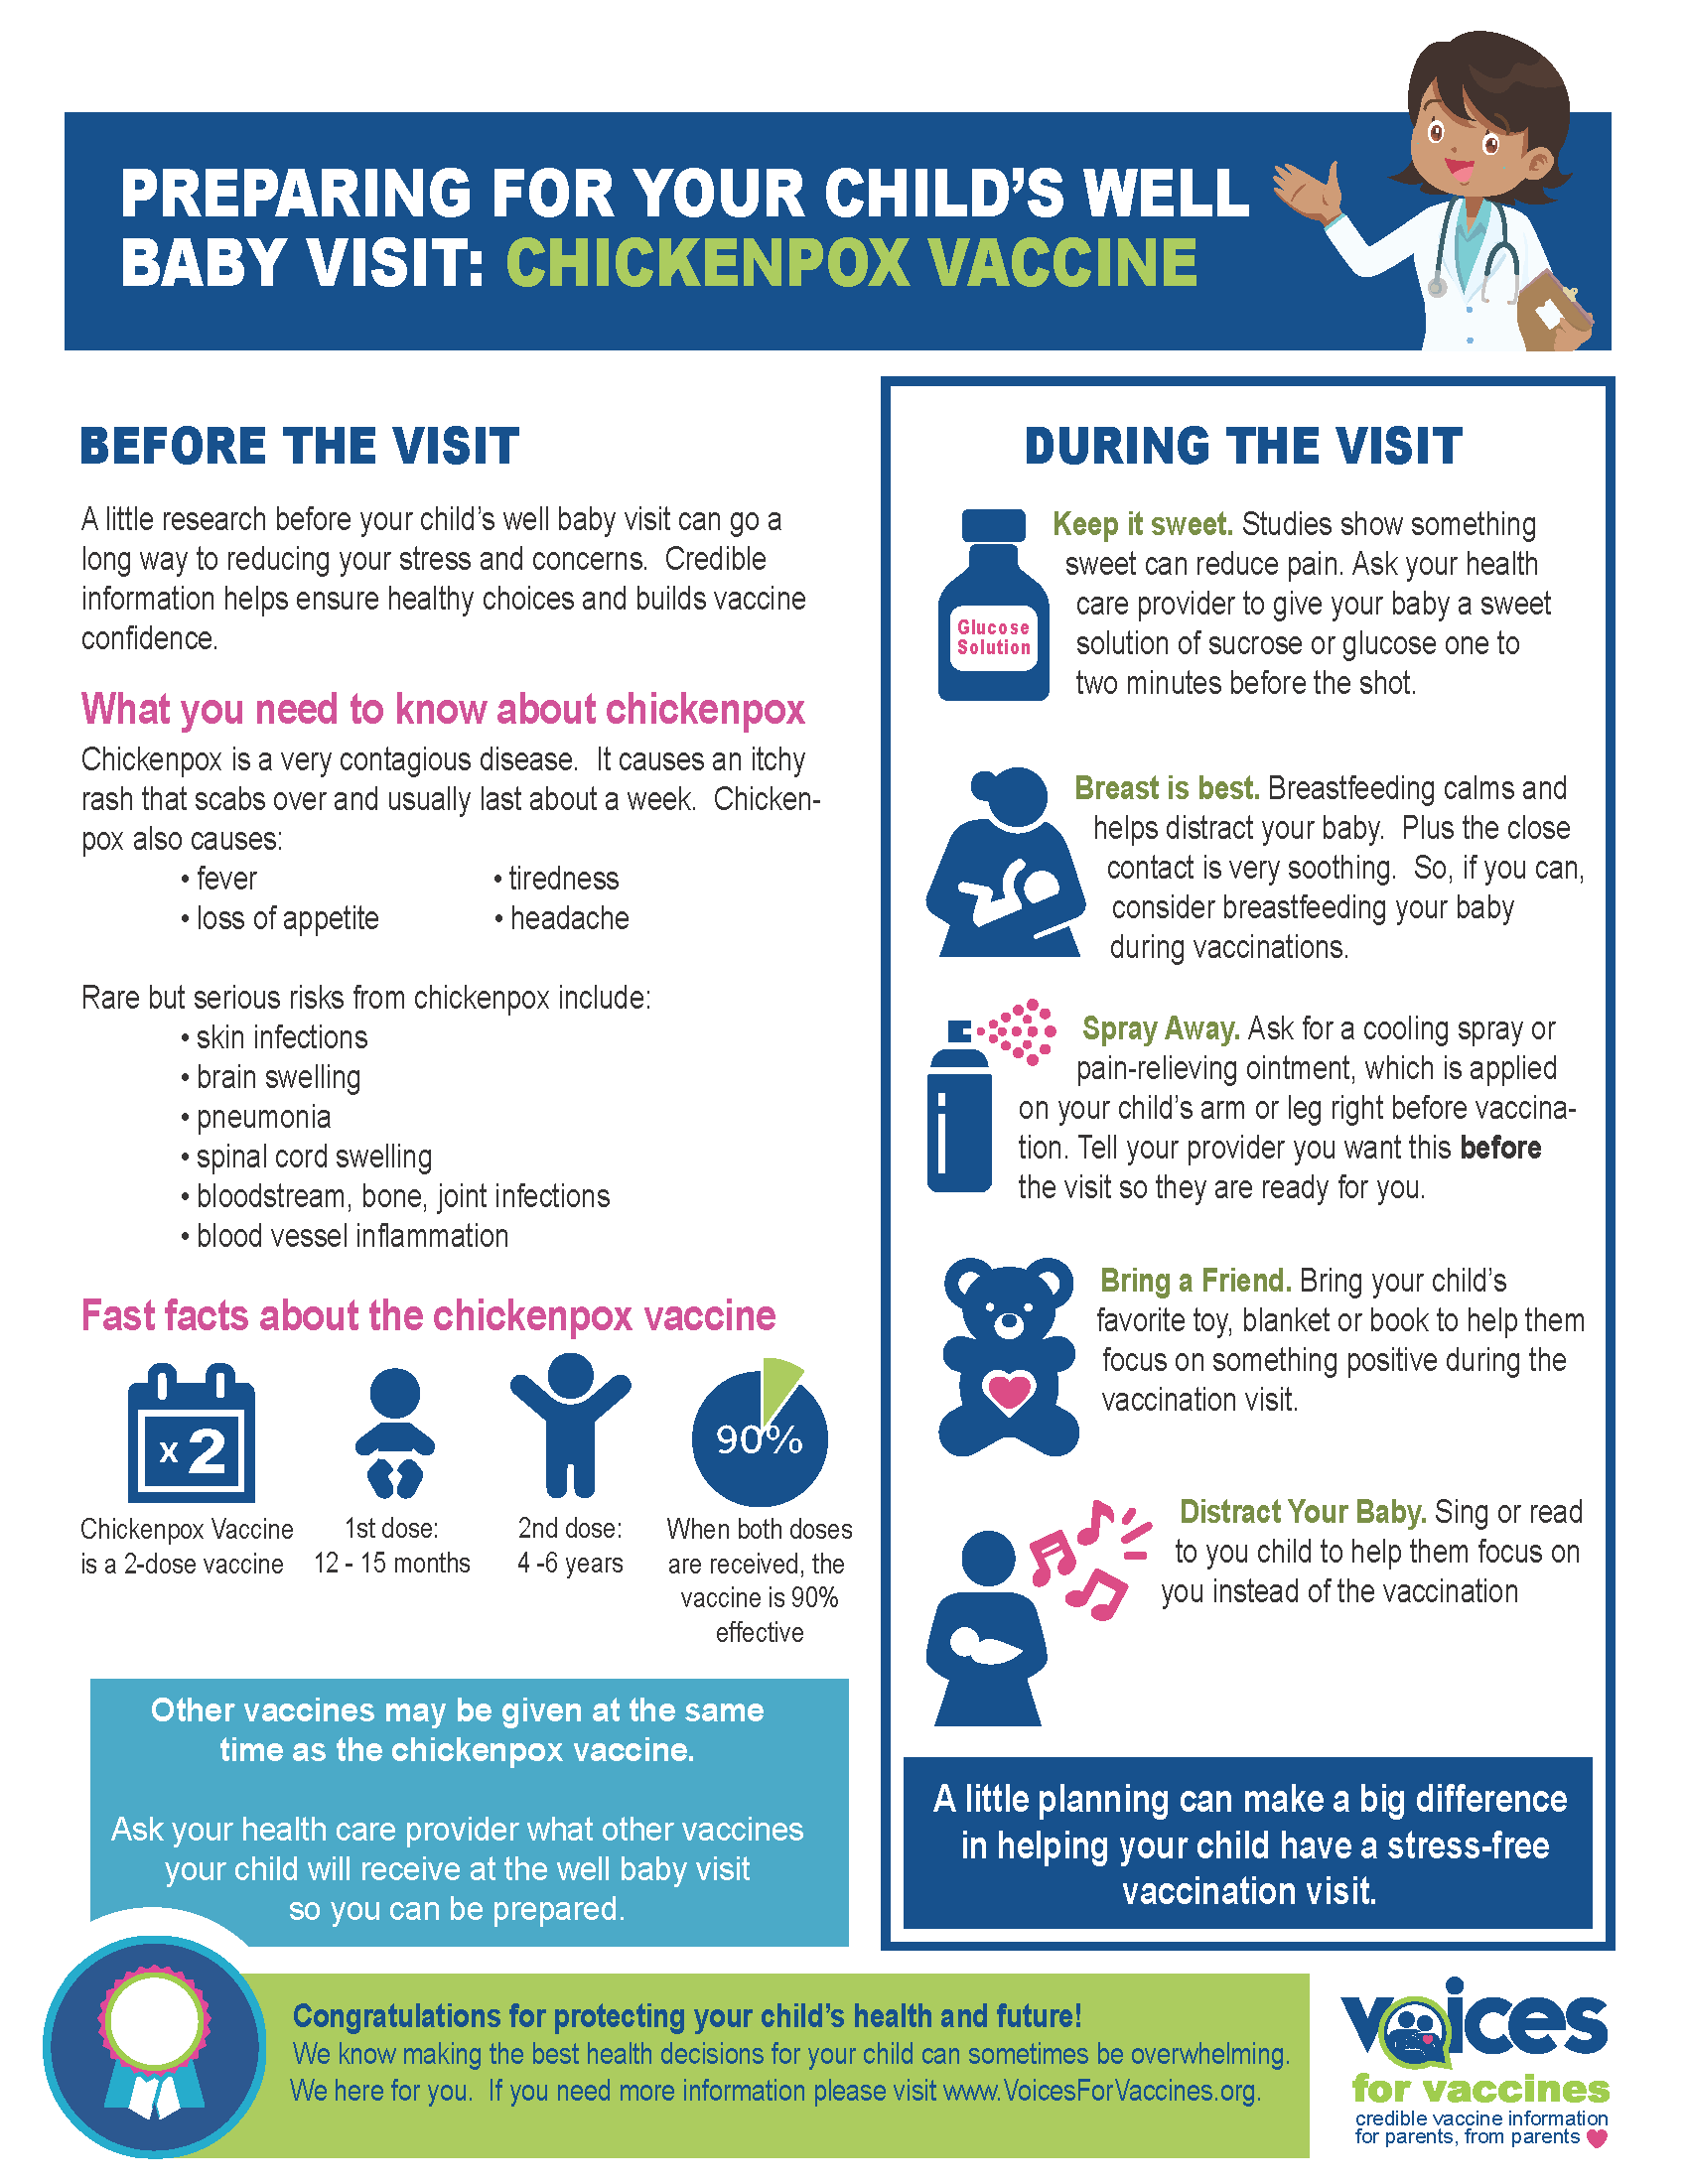 Download the Chickenpox PDF Fact Sheet